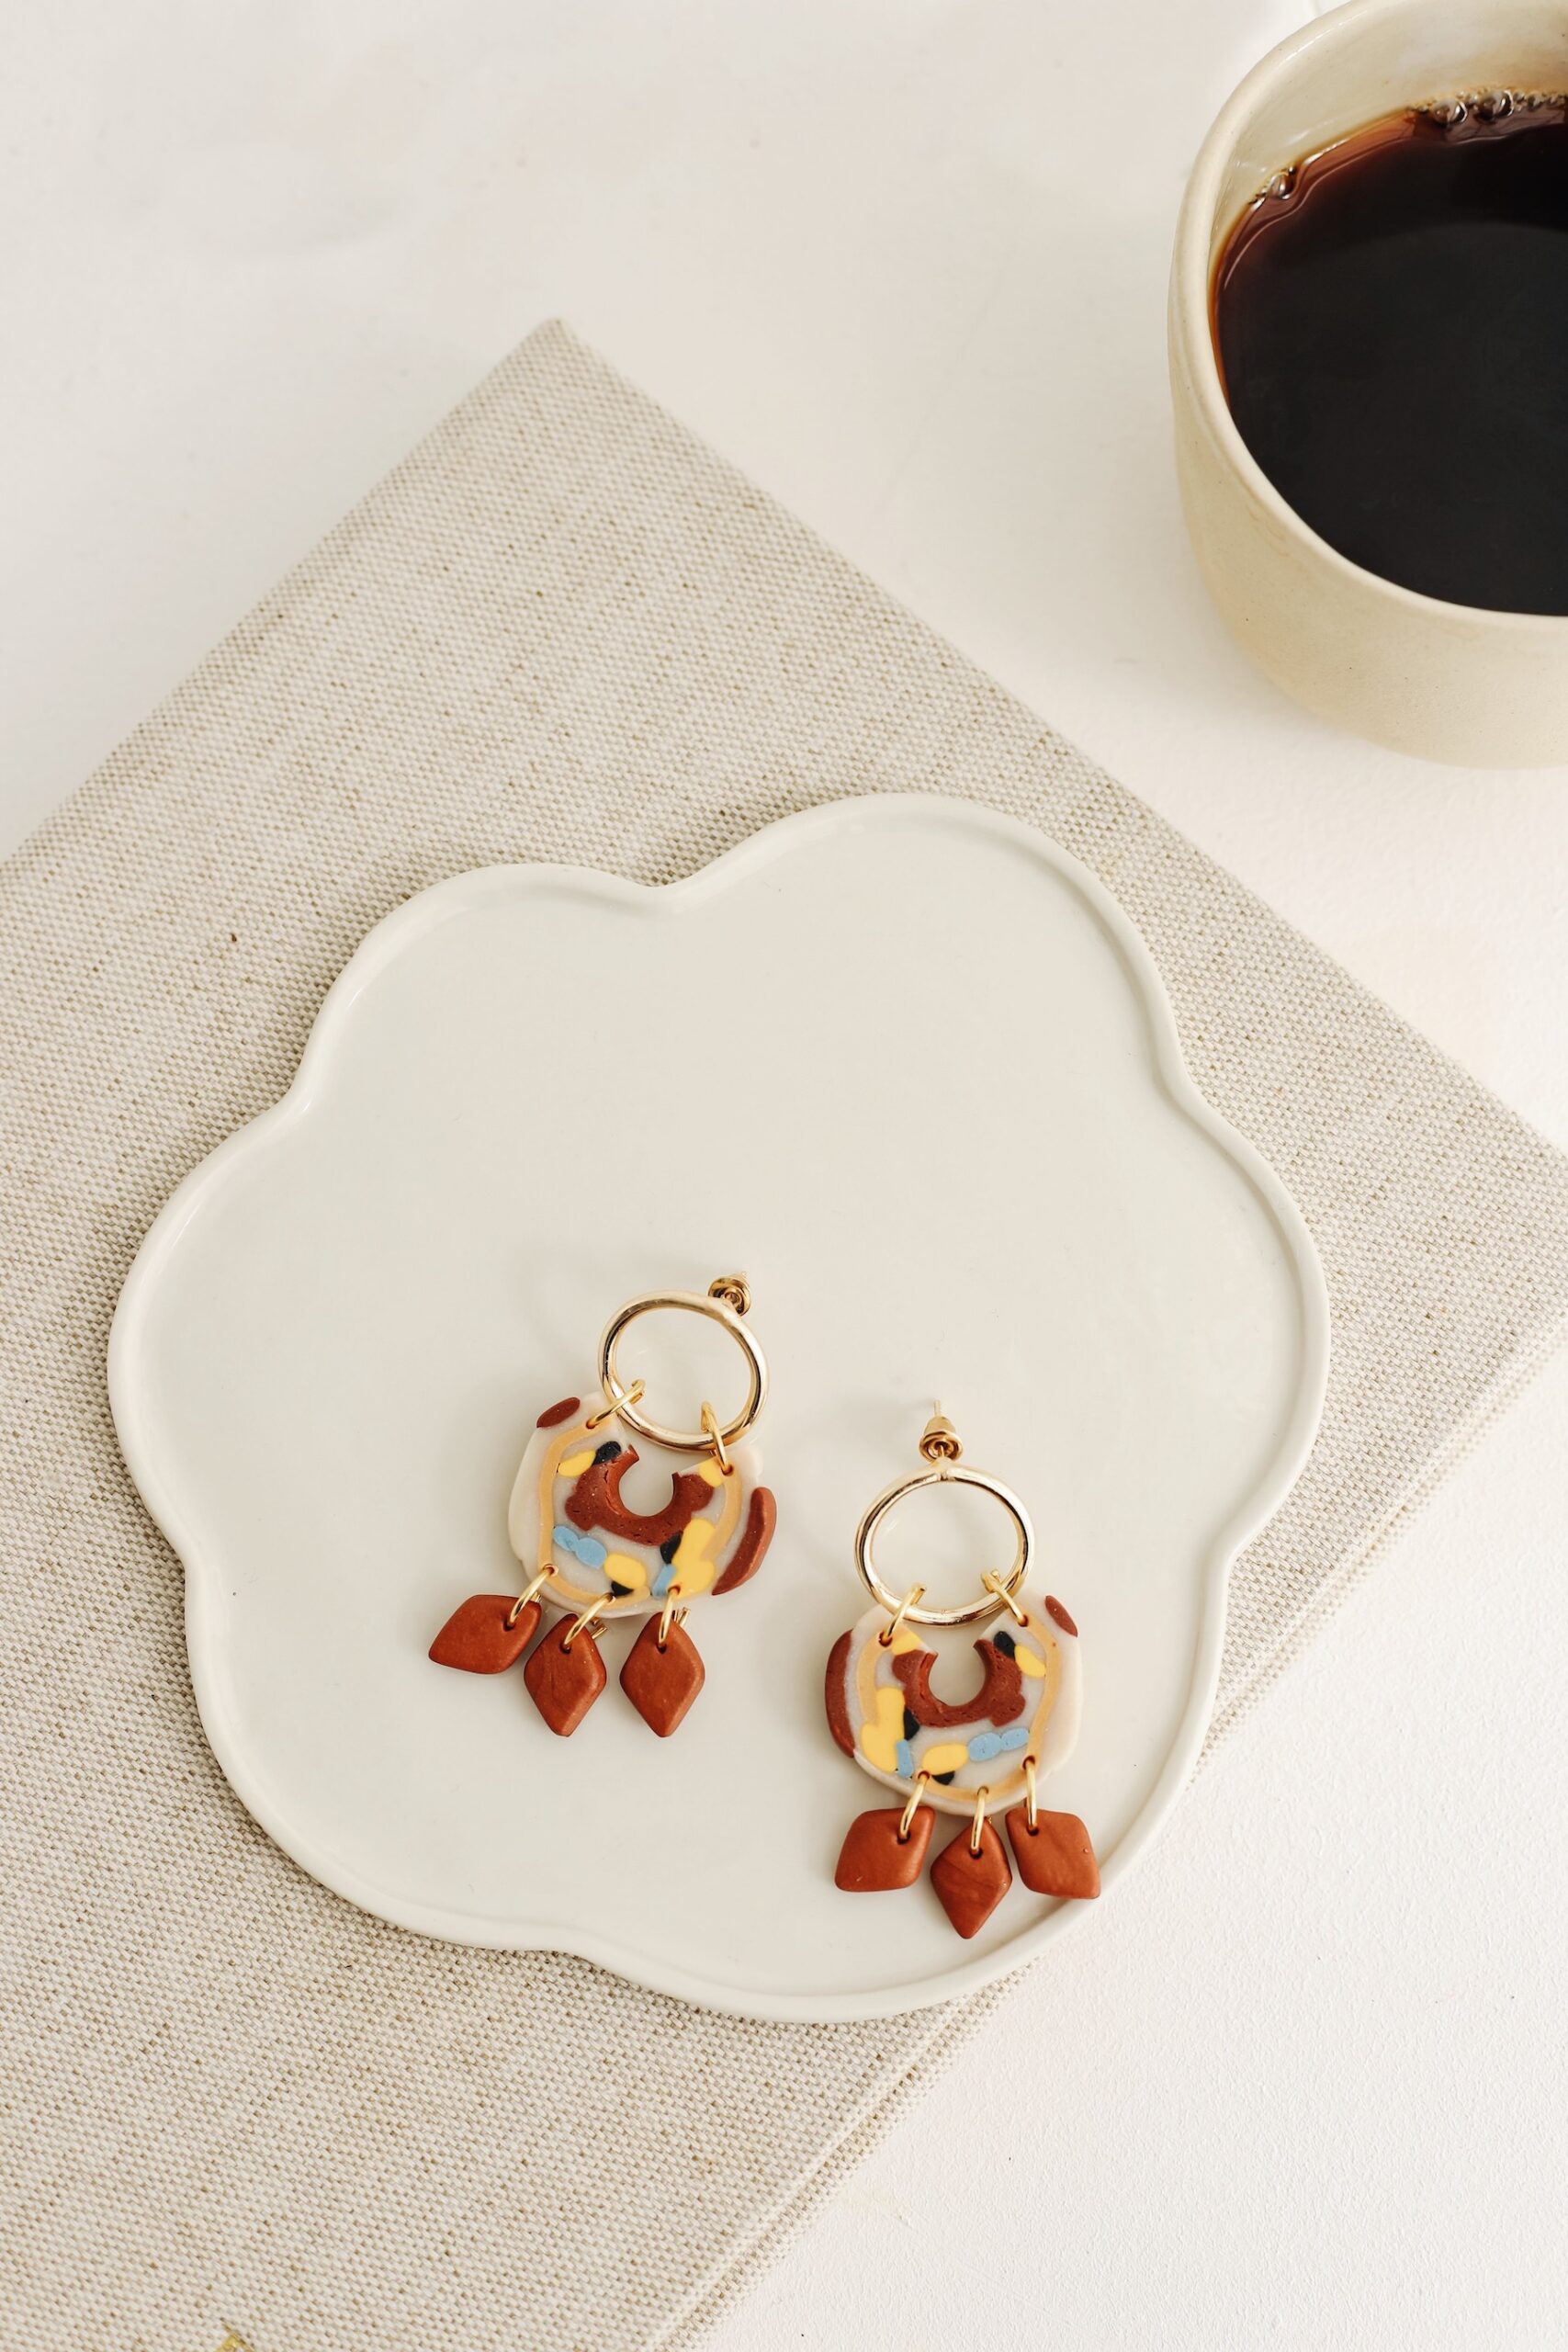 Carmen is an earring was designed by a handmade woman designer. It was made of clay